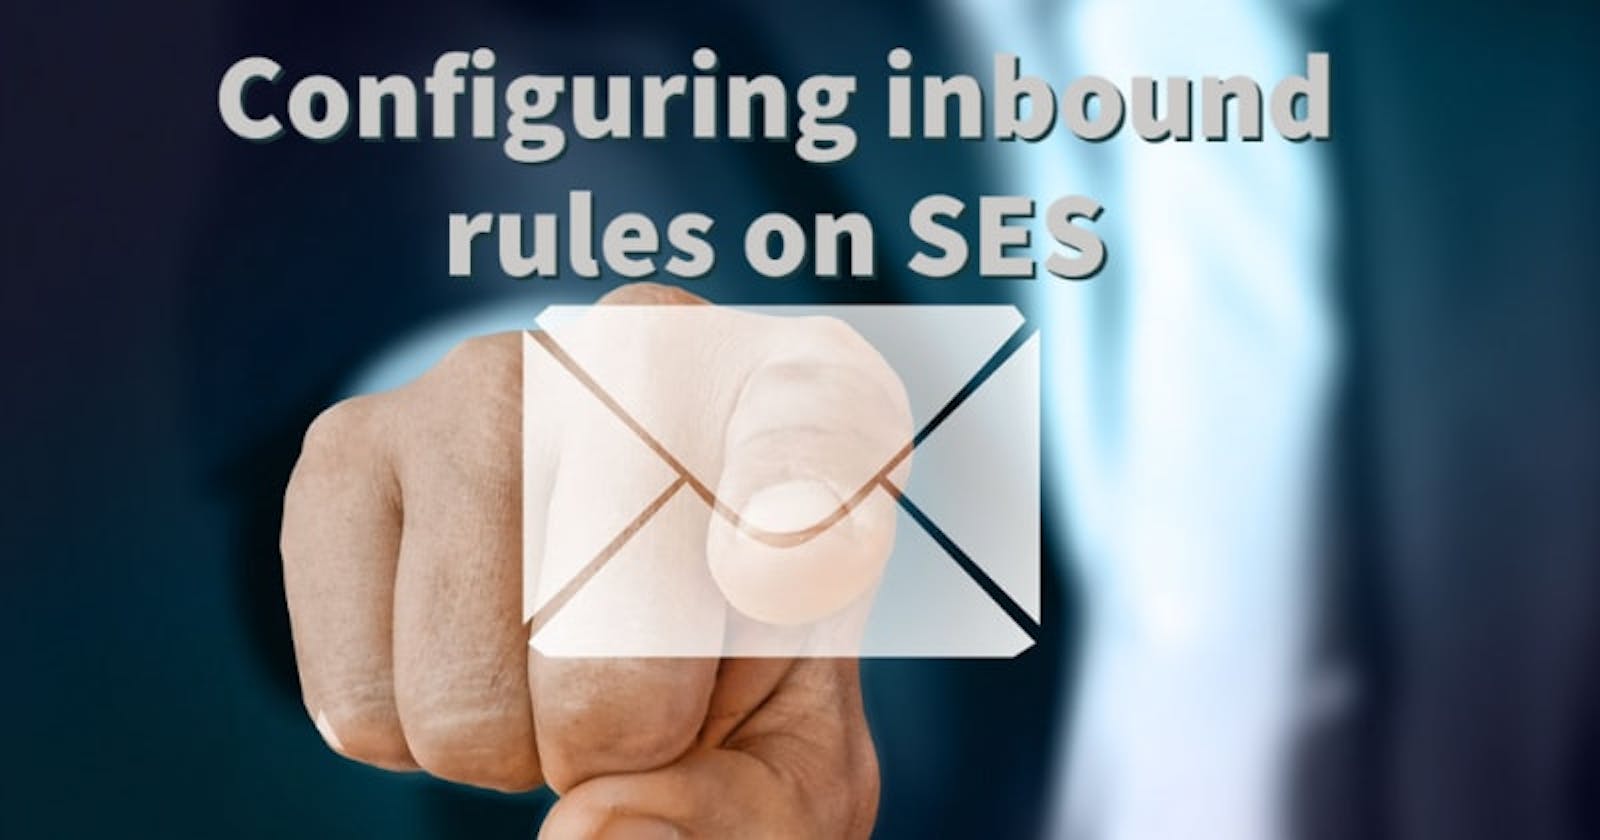 Configuring inbound rules on SES